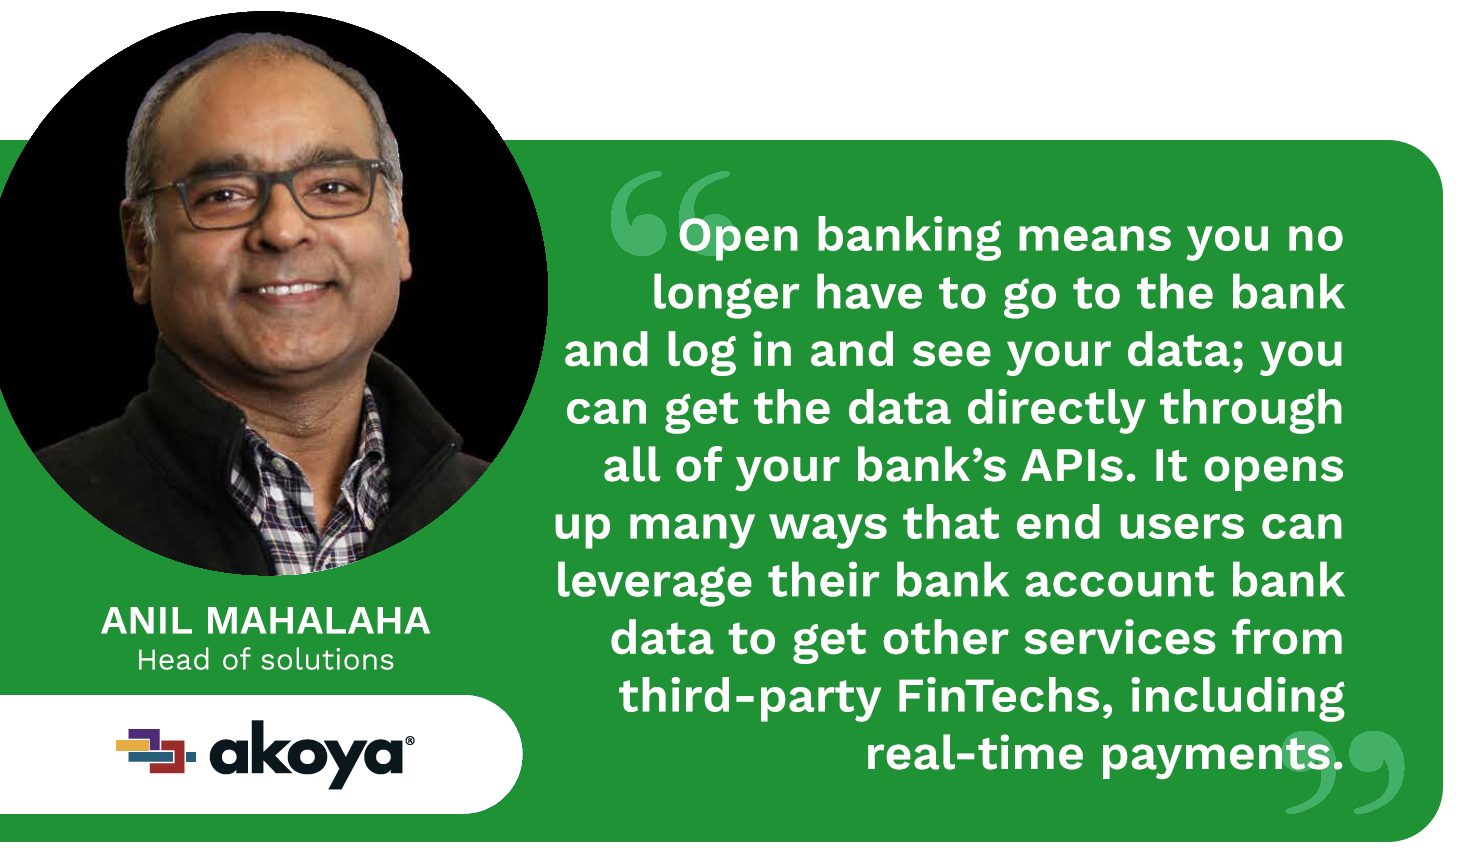 Anil Mahalaha, head of solutions at Akoya, explains why open banking proliferation in the U.S. has been slow to catch on.